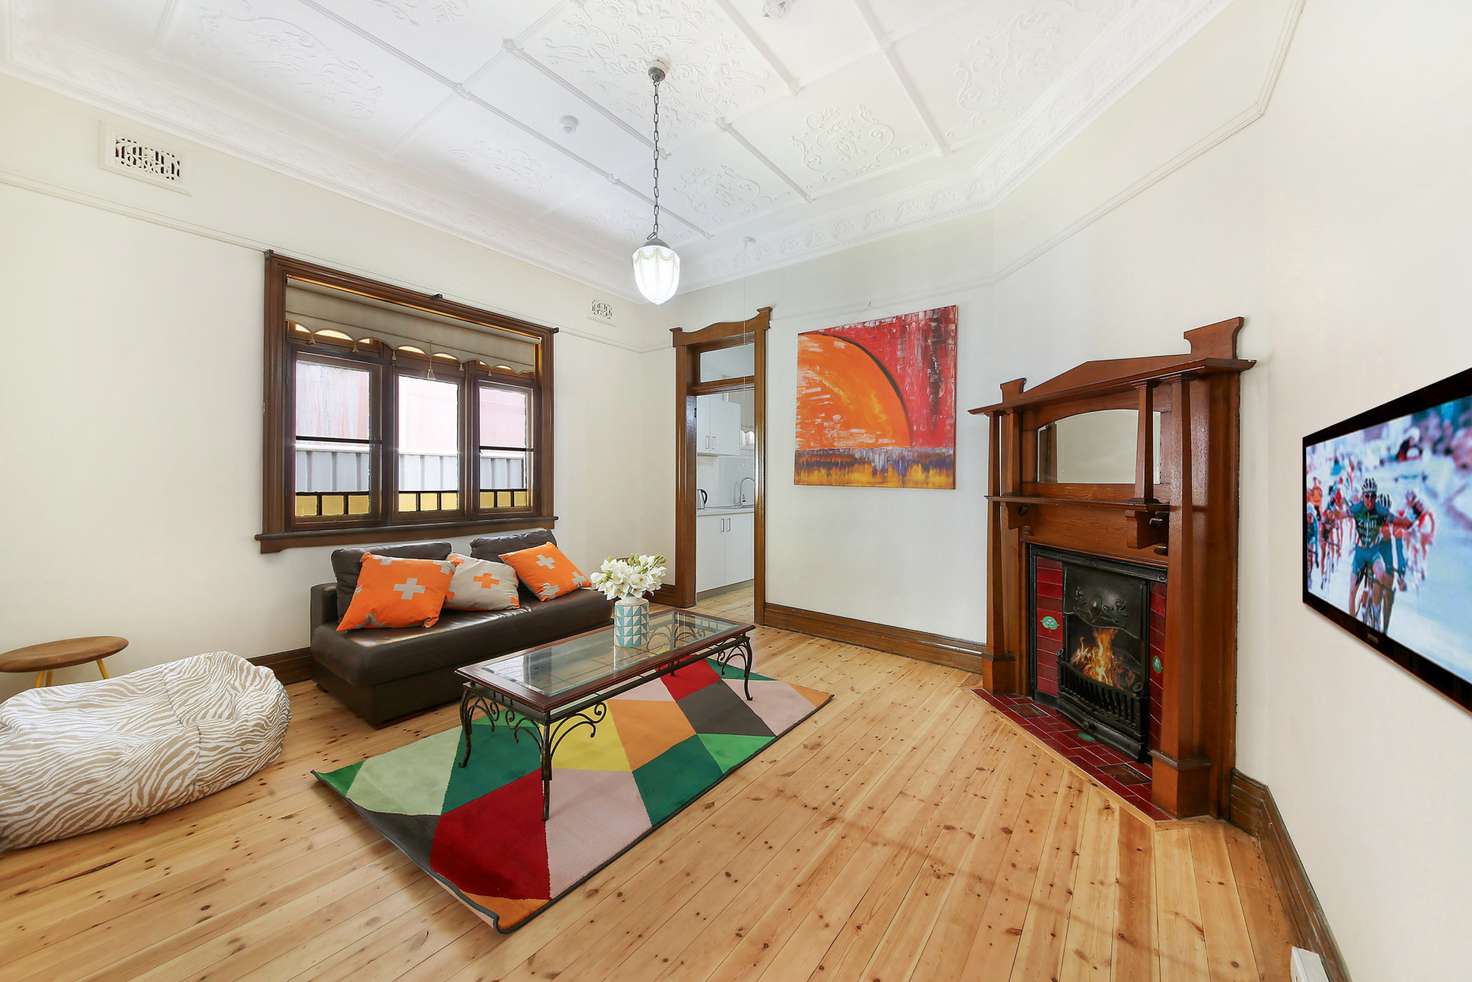 Main view of Homely apartment listing, 48 Gray, Kogarah NSW 2217